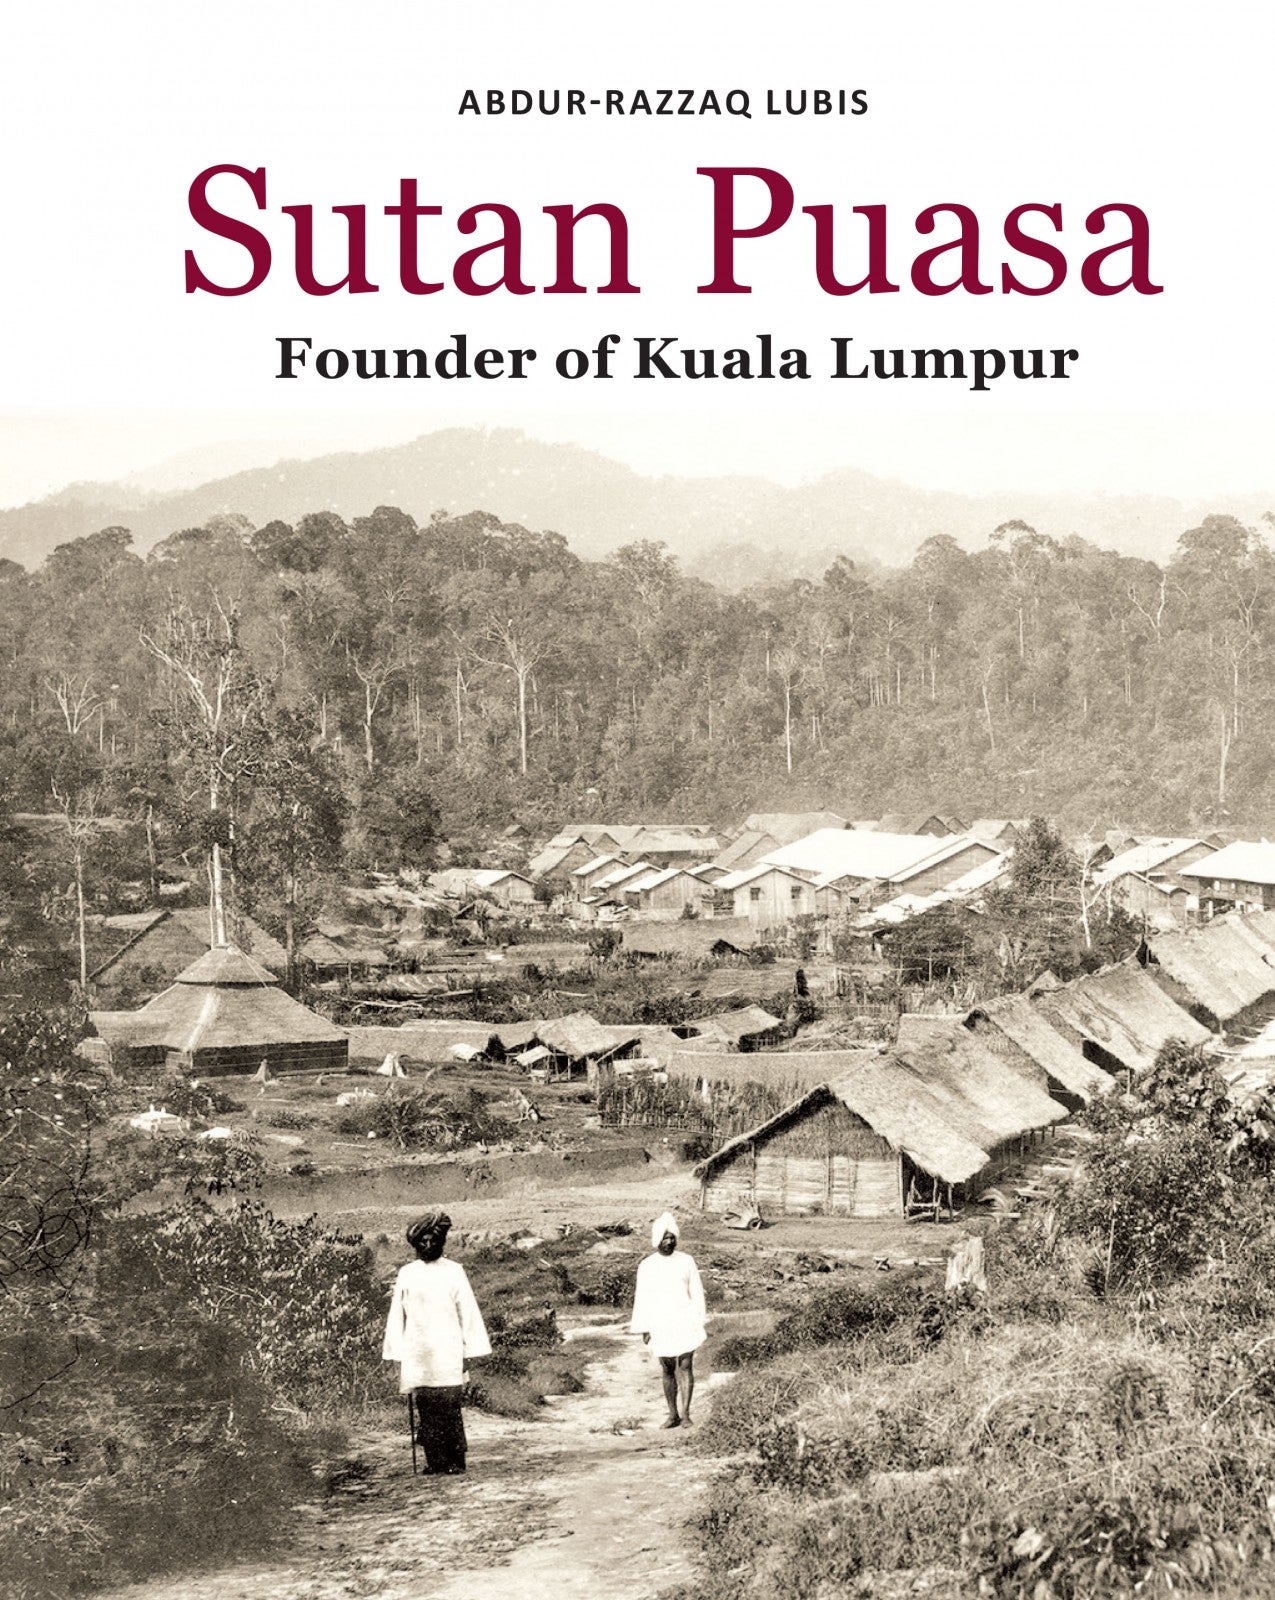 Yap Ah Loy May Not Have Founded Kuala Lumpur, According to This New Book - WORLD OF BUZZ 1